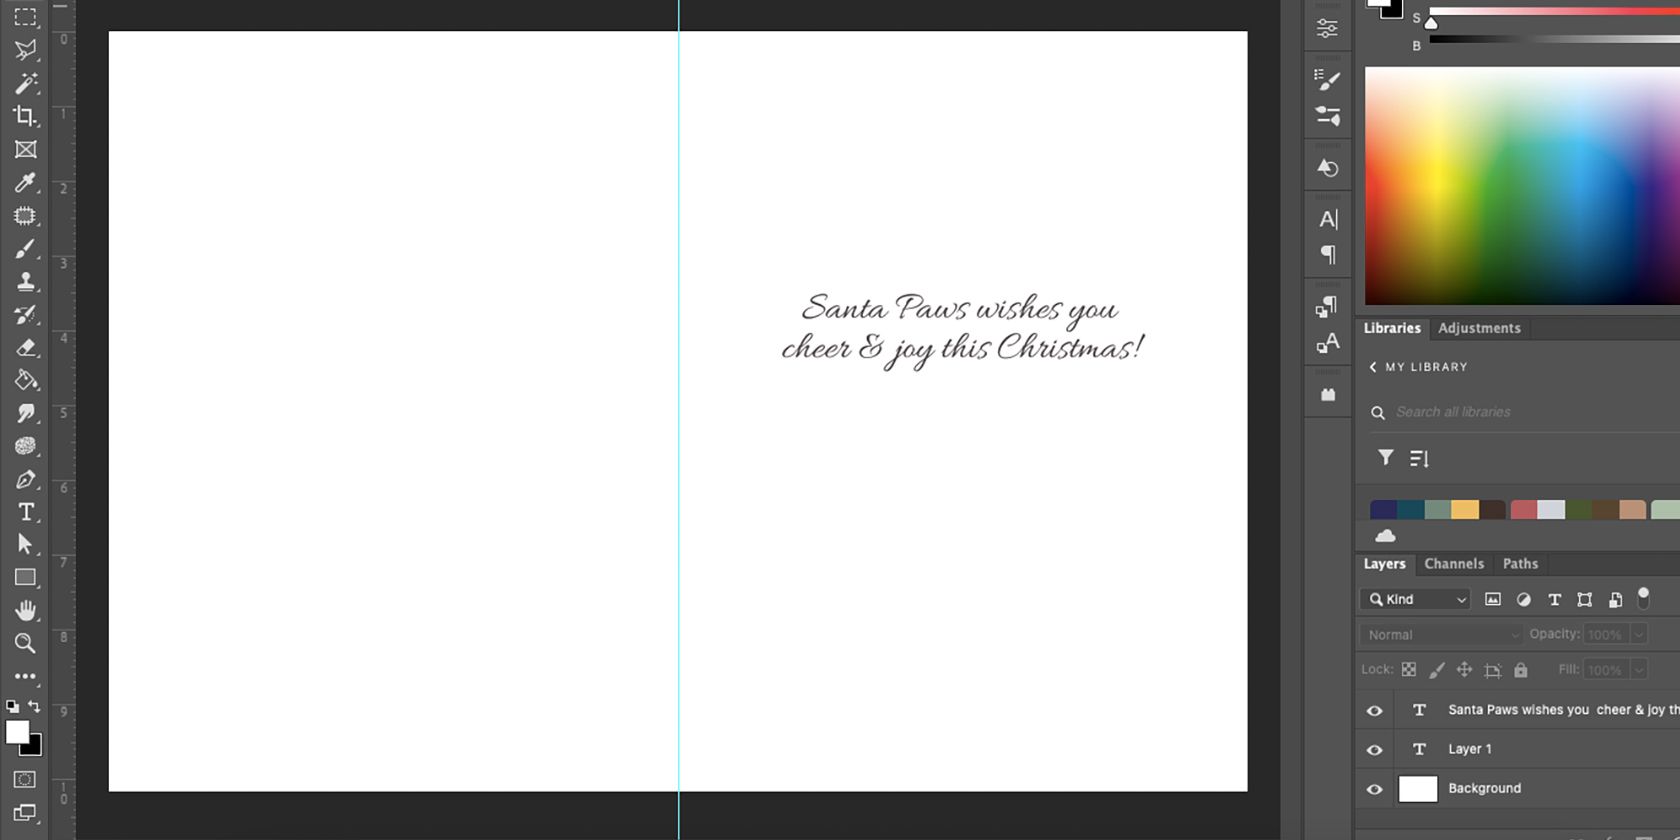 Inside message of Christmas card in Photoshop.